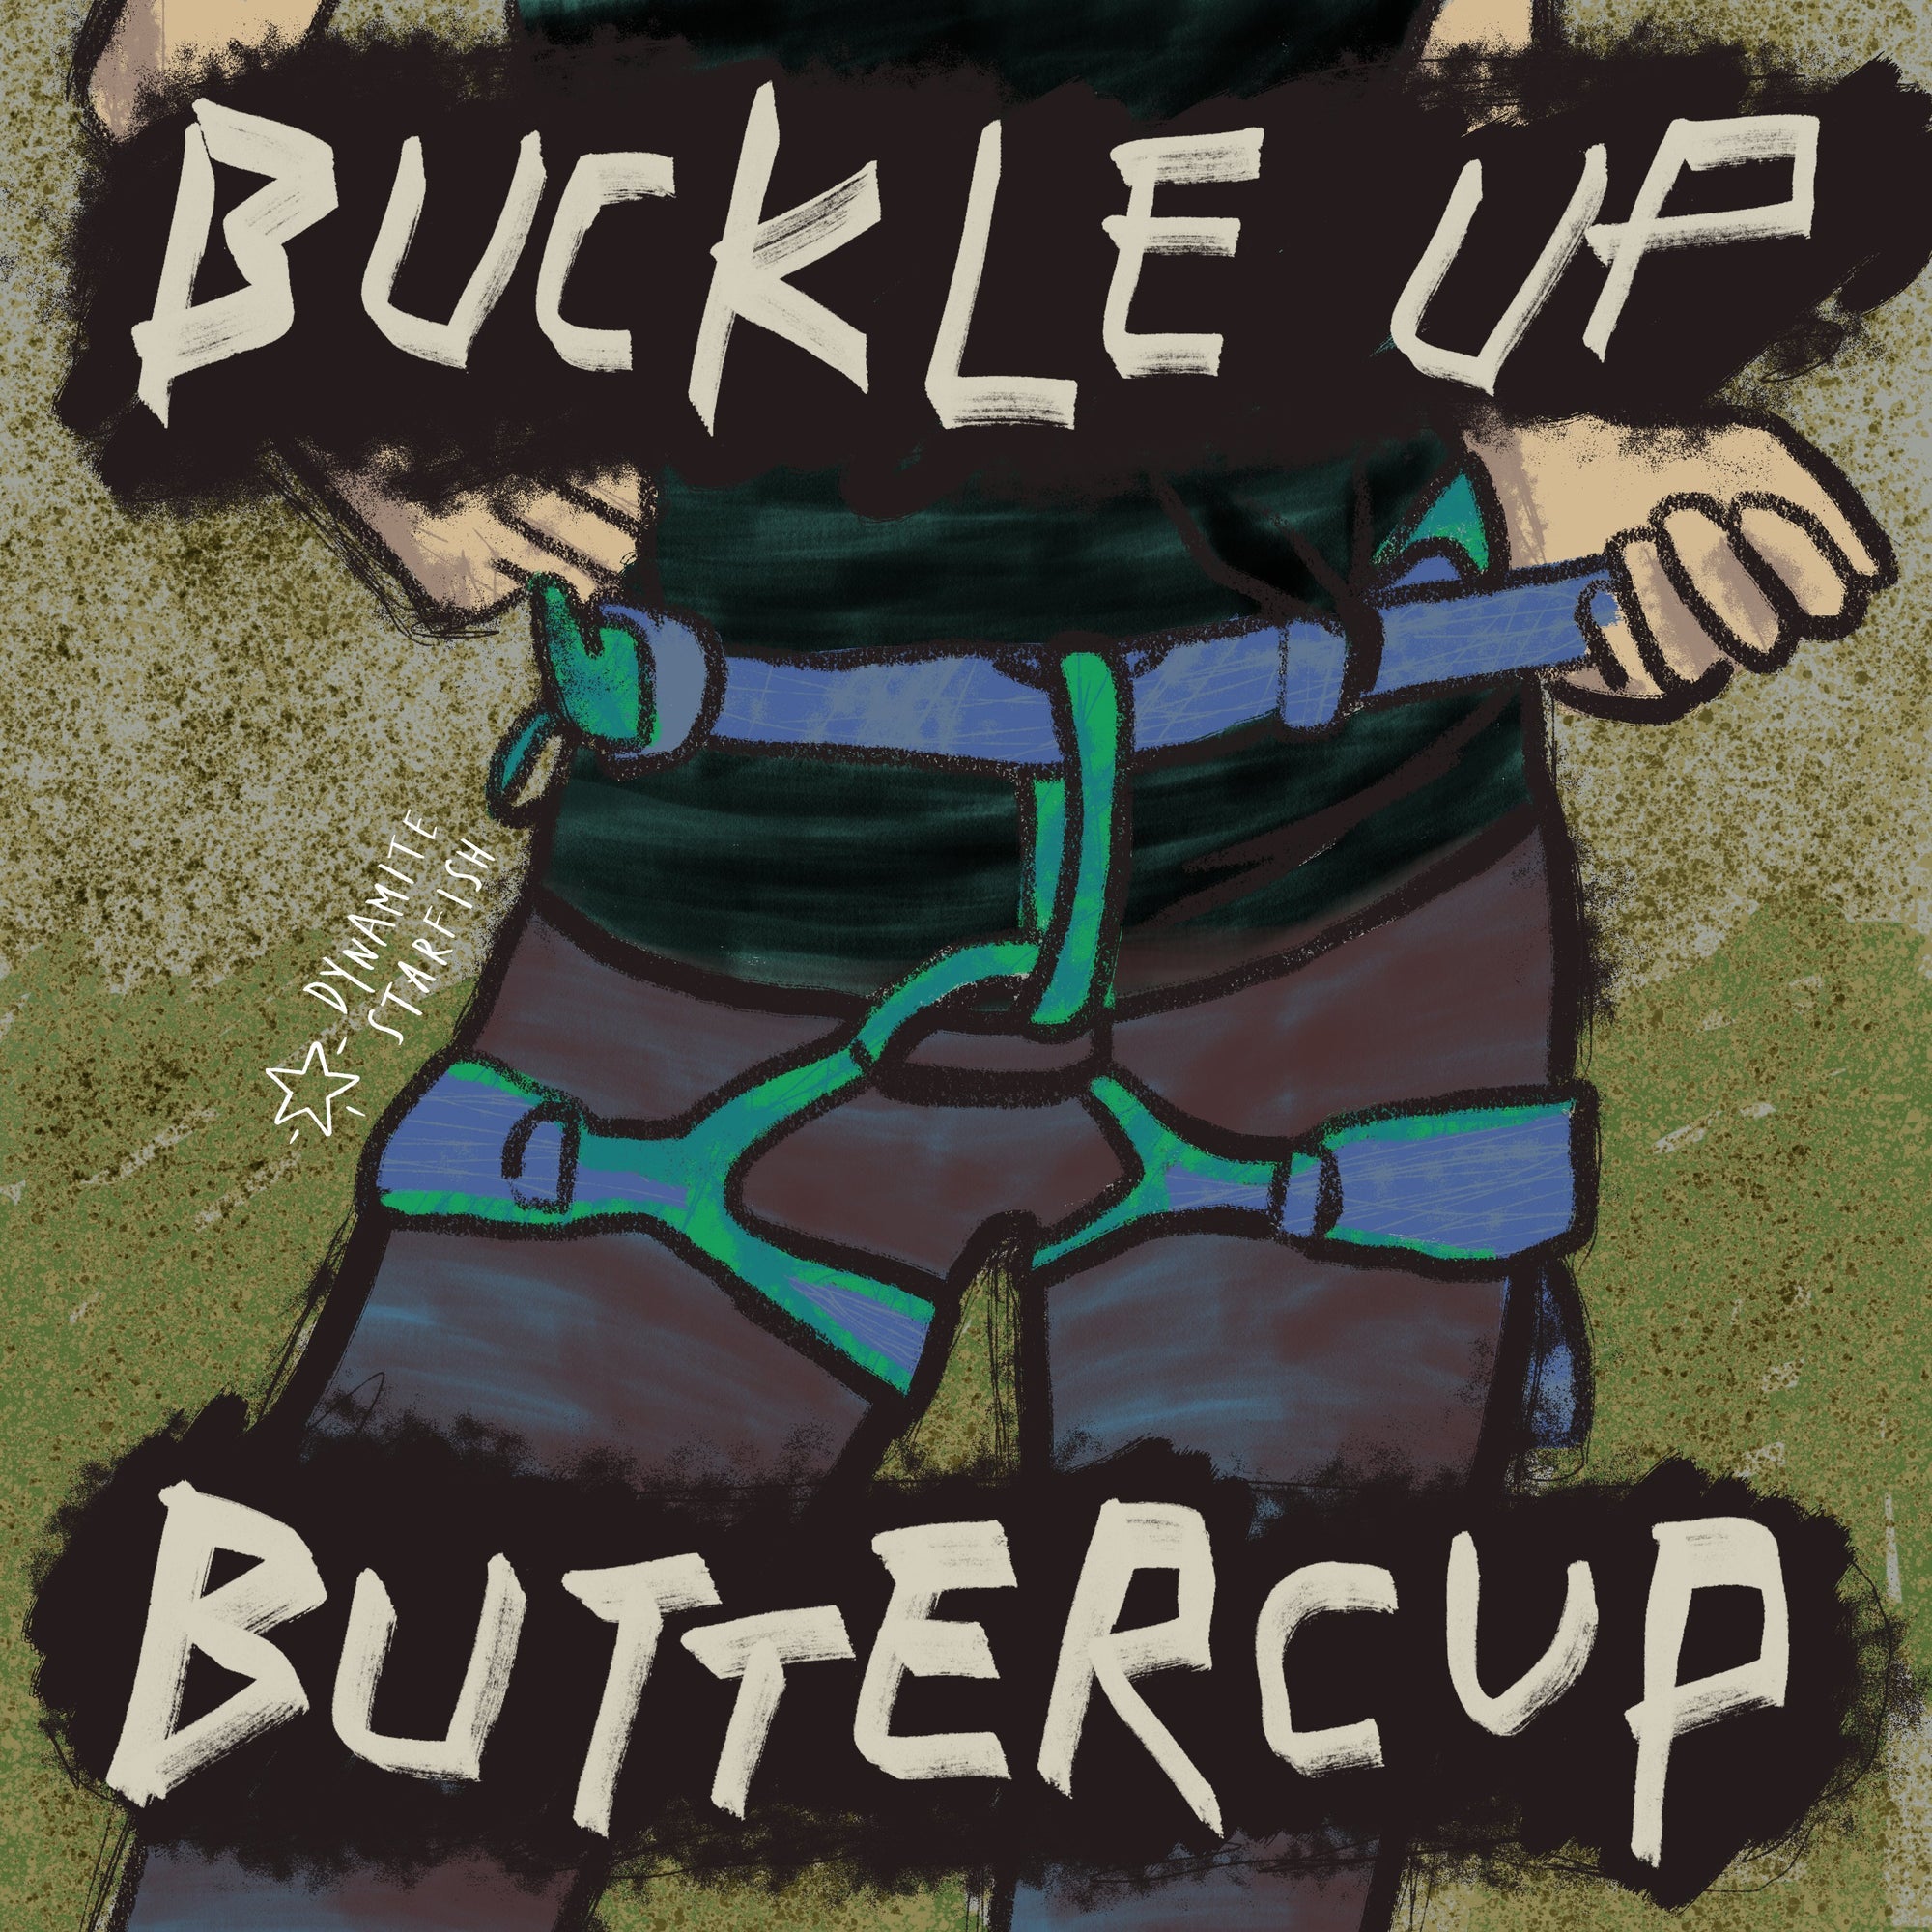 100 Drawings about Climbing — Buckle Up Buttercup - Dynamite Starfish